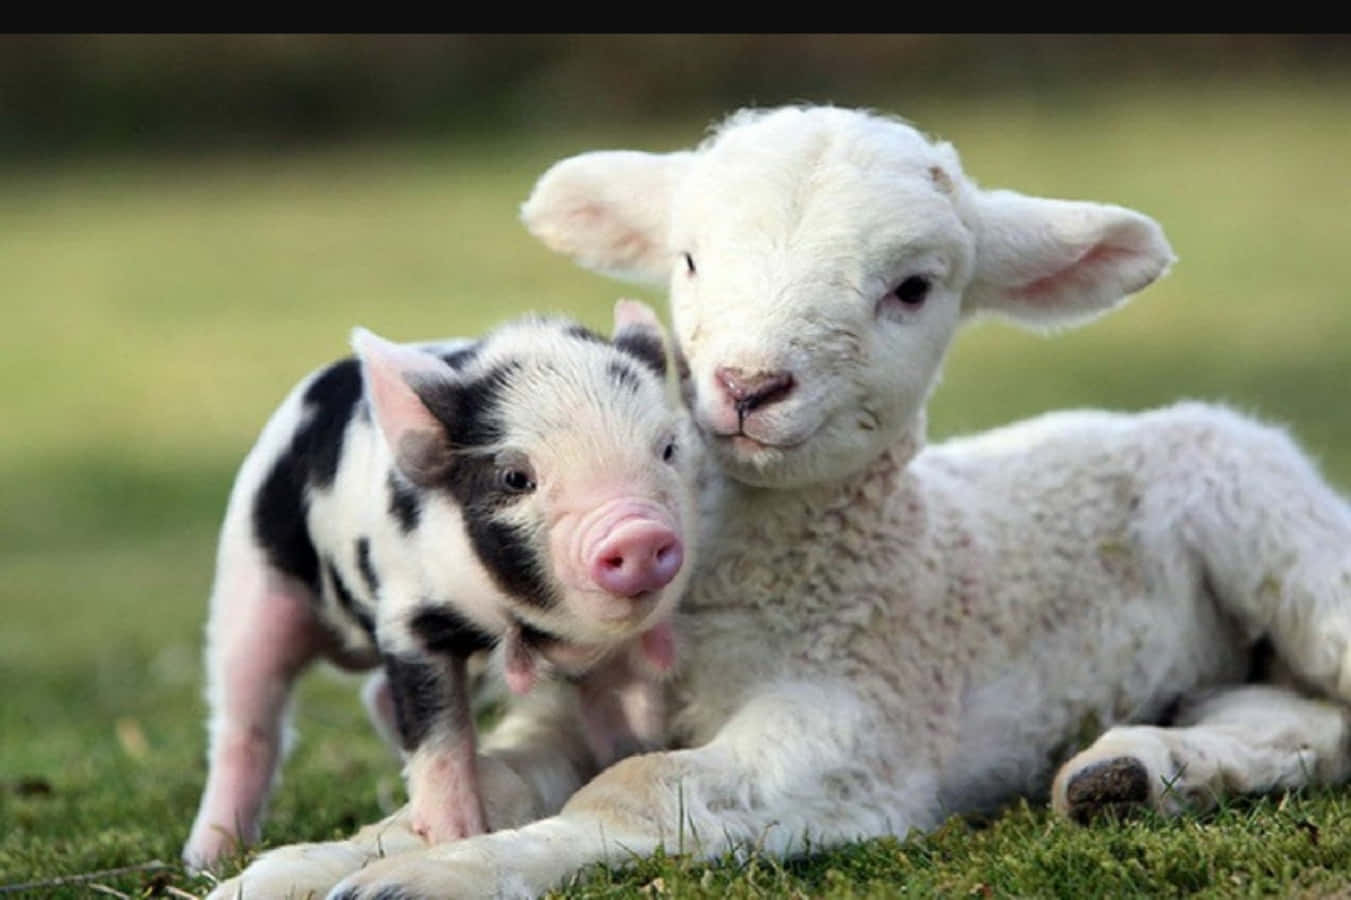 A Lamb And Pig Are Laying Together In The Grass